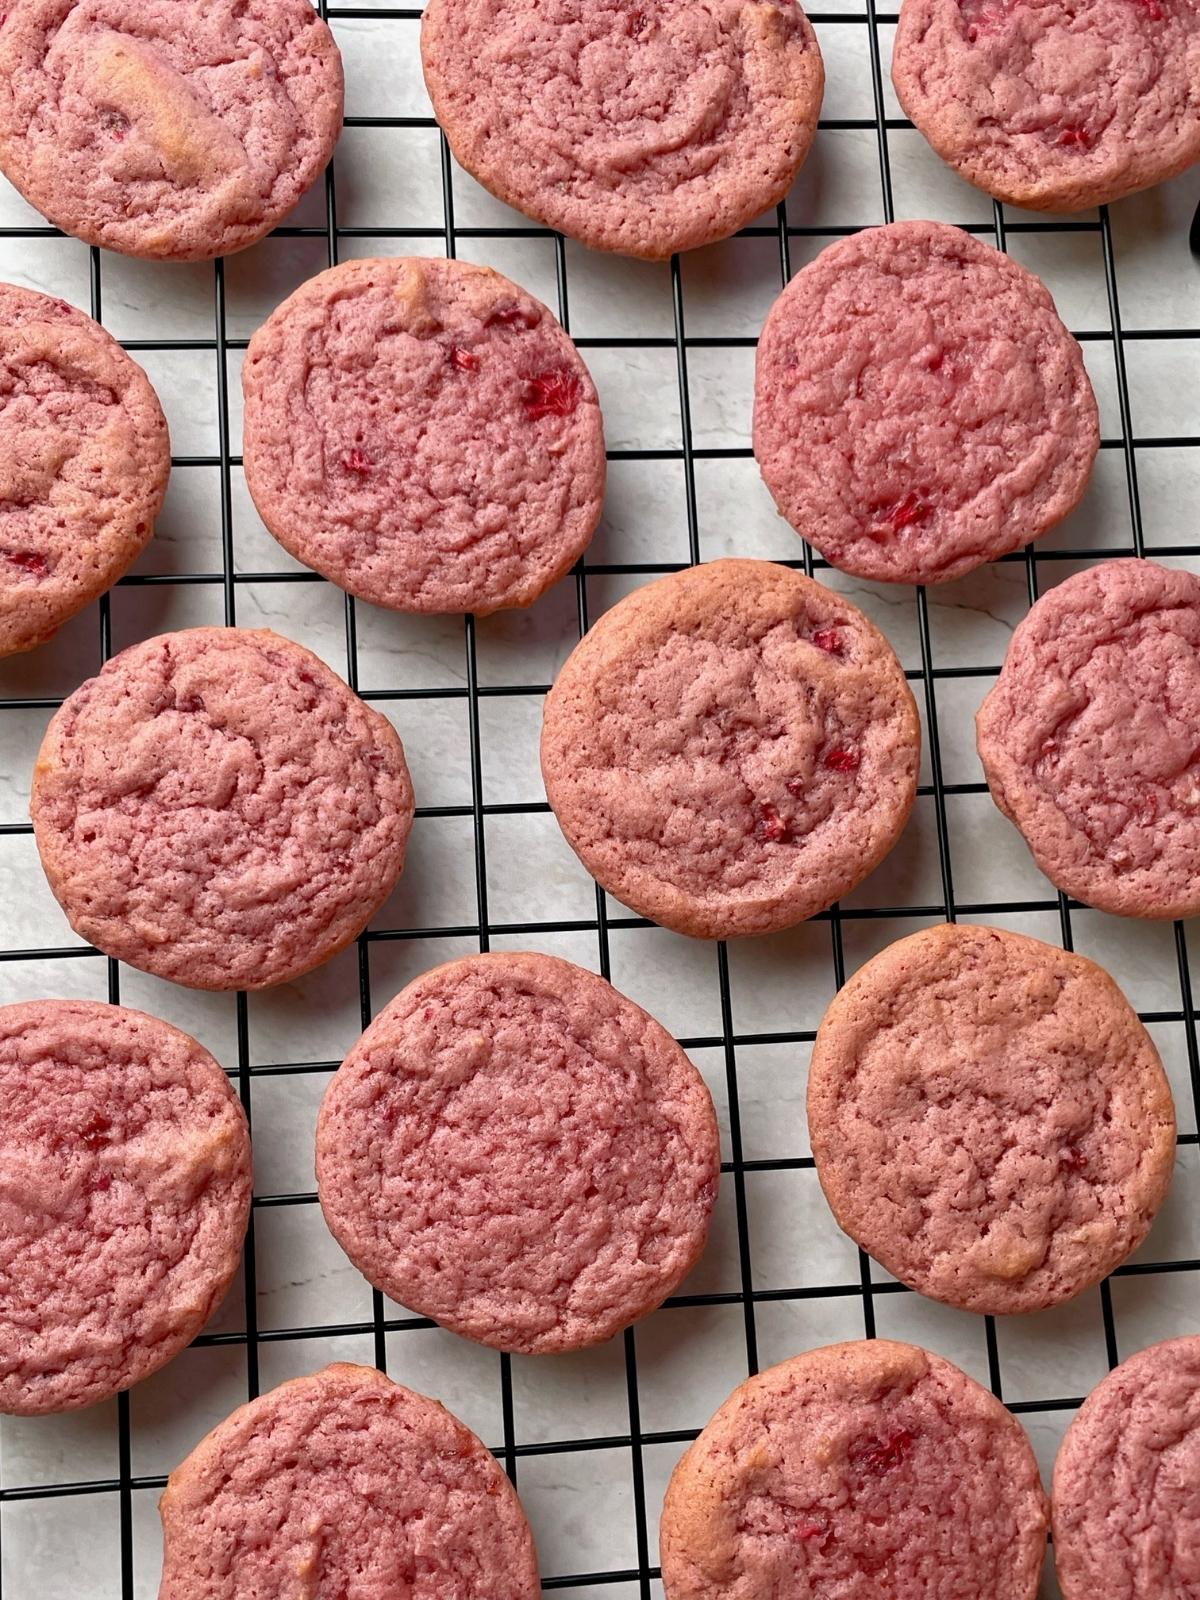 Strawberry cookies on a cooling rack.